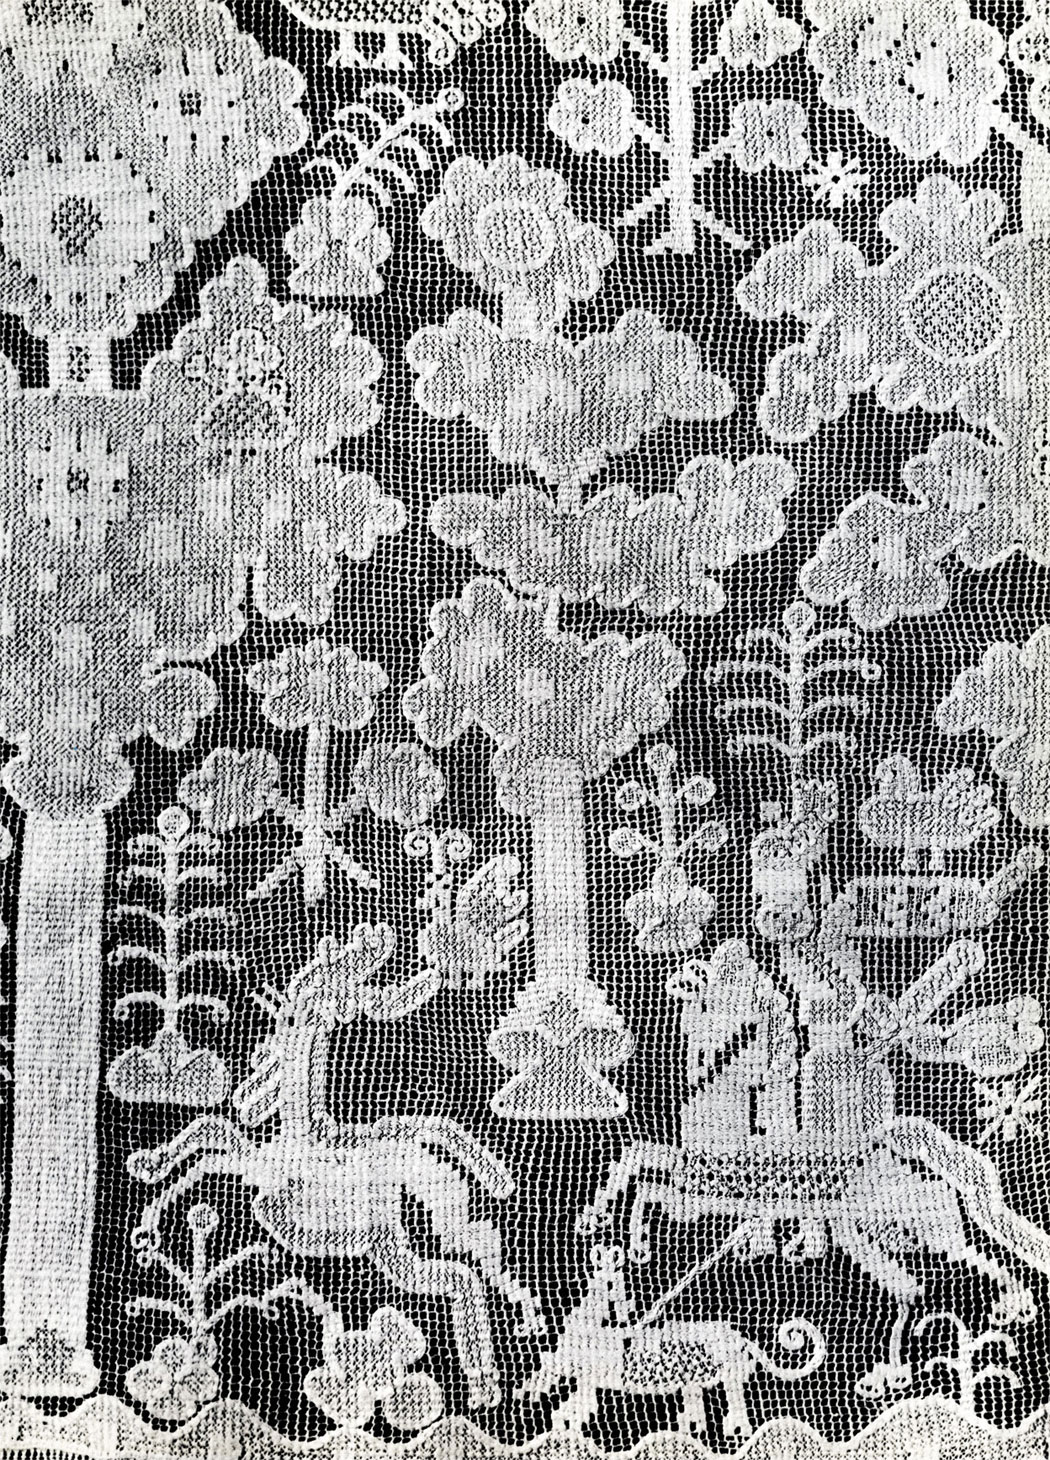 Detail of the valance